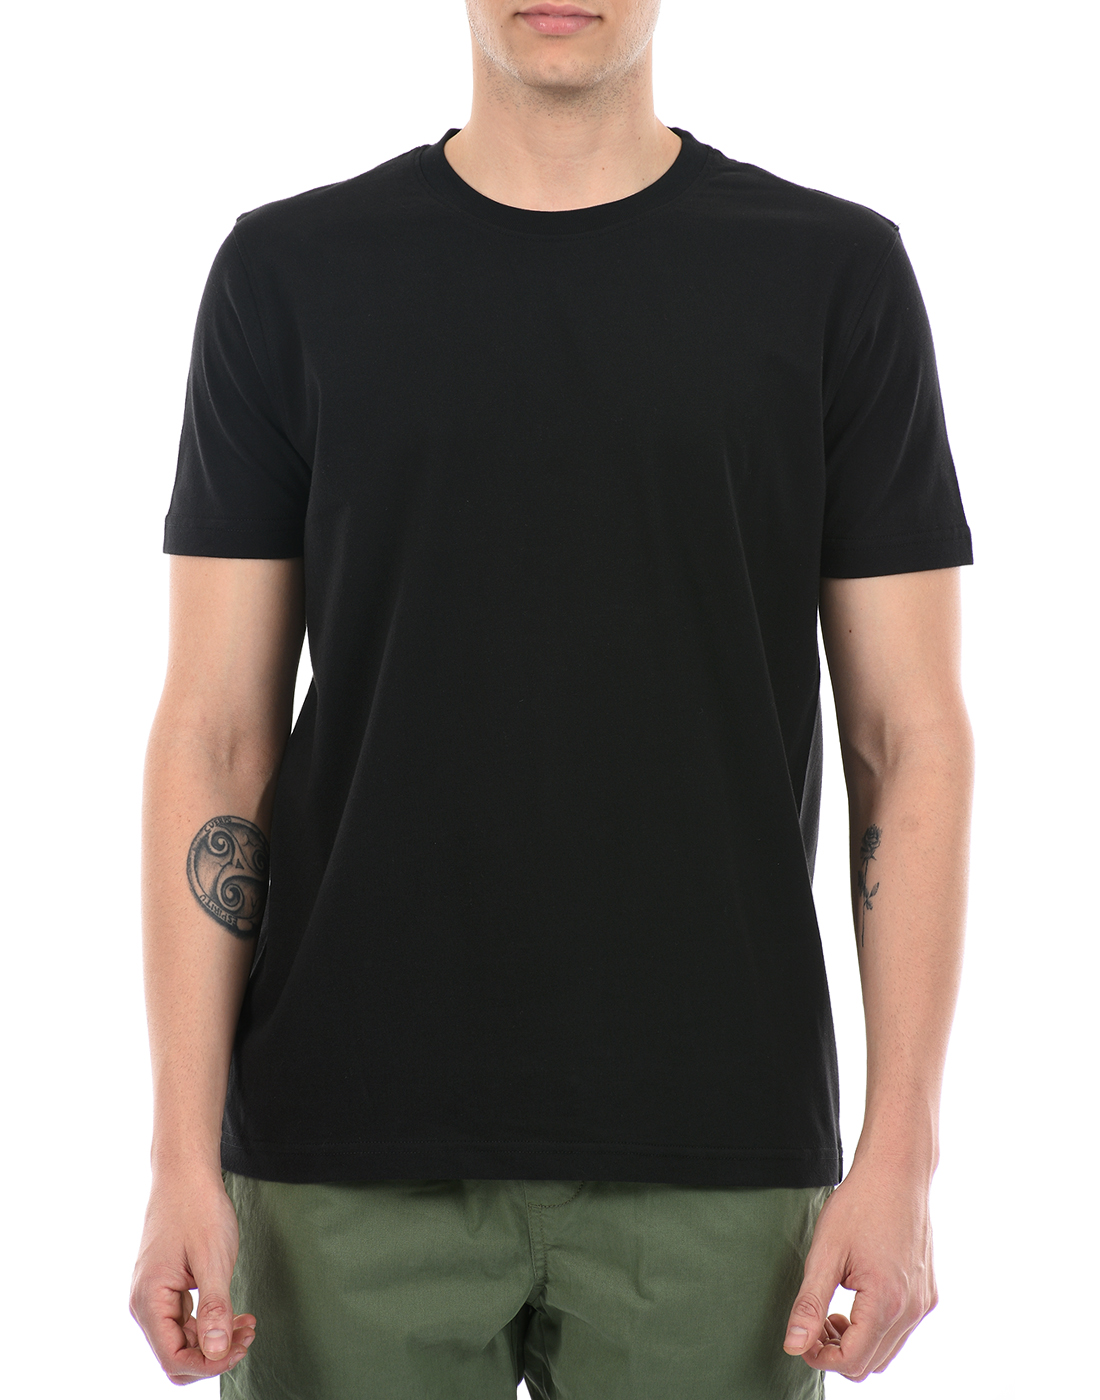 ONEWAY Round Neck Half Sleeves Solid T-Shirt for Men|100% Cotton|Regular Fit|Men's Stretchable T-Shirt|Casual Westernwear